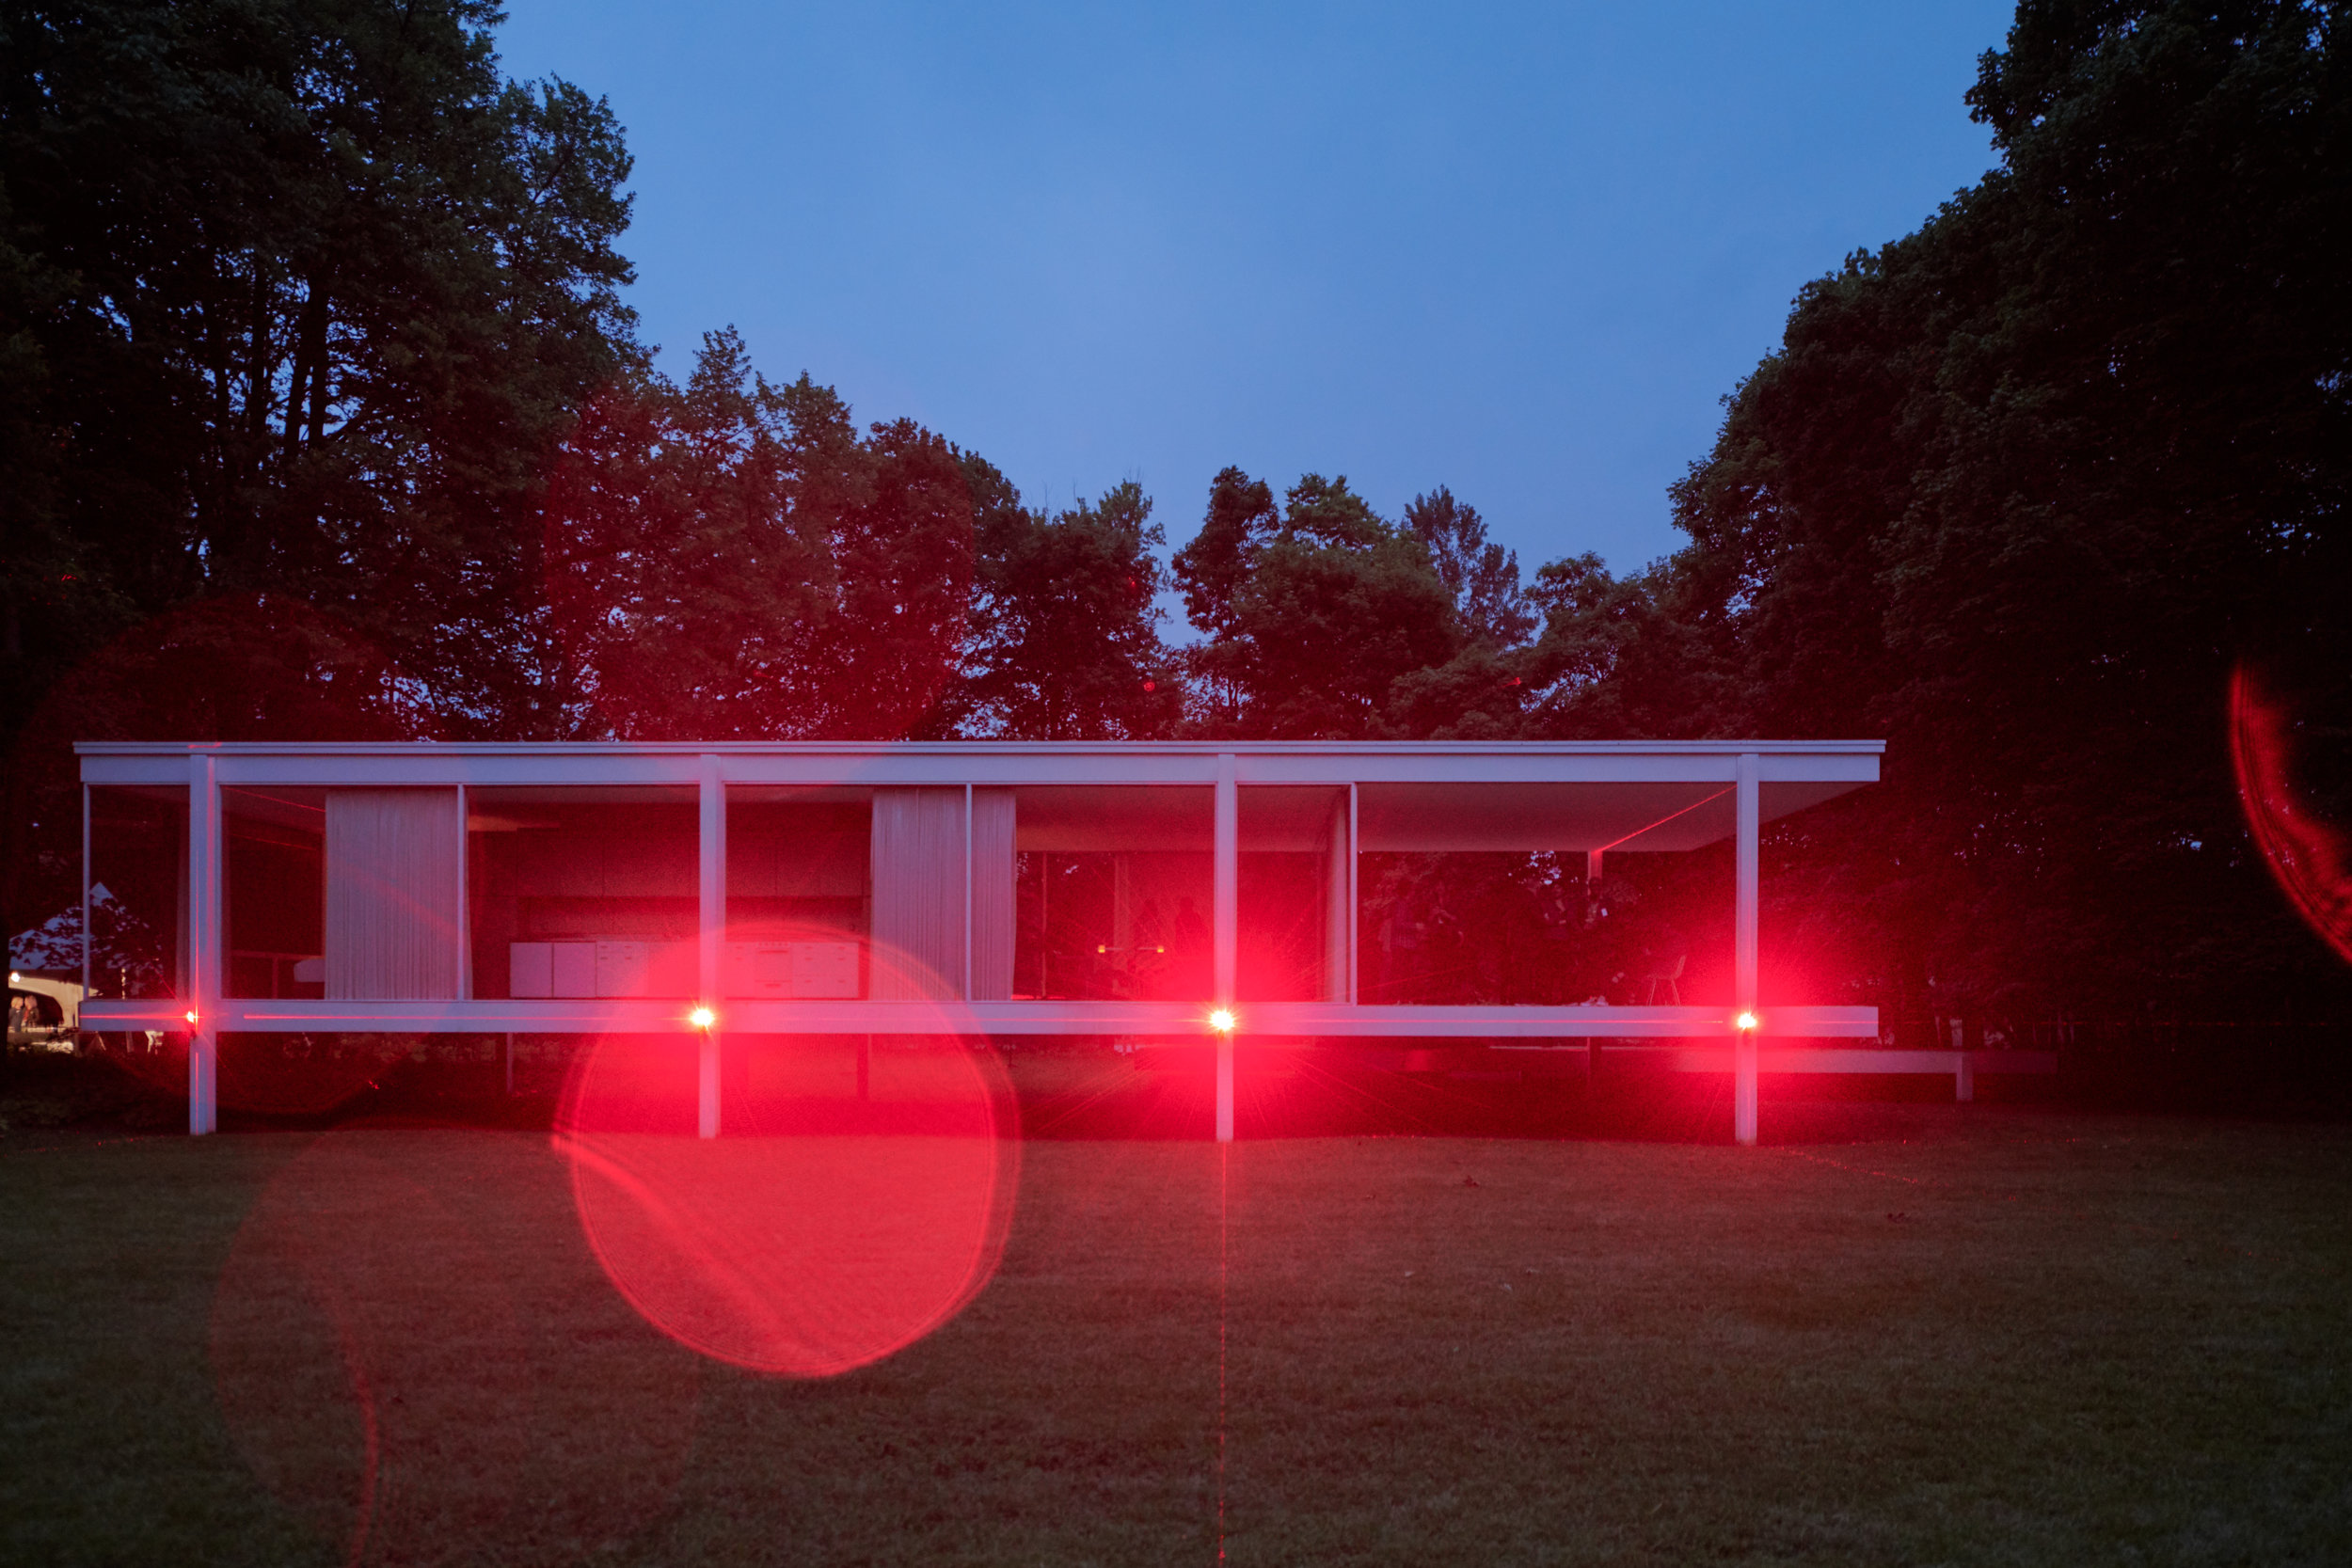  Architecture photography of  Luftwerk  and  Iker Gil’ s art installation at Mies van der Rohe’s  Farnsworth House  